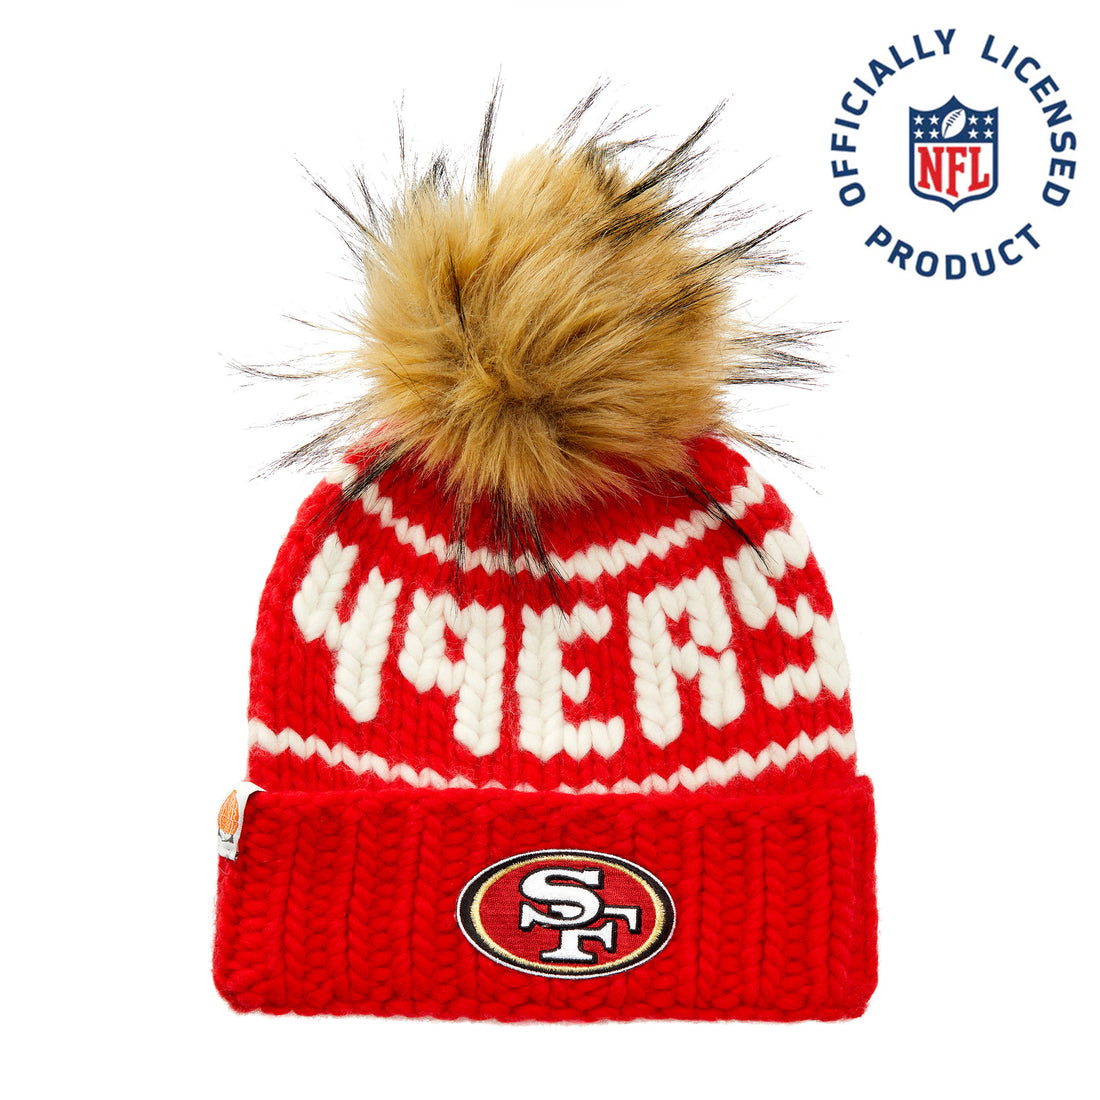 The 49ers NFL Beanie with Faux Fur Pom